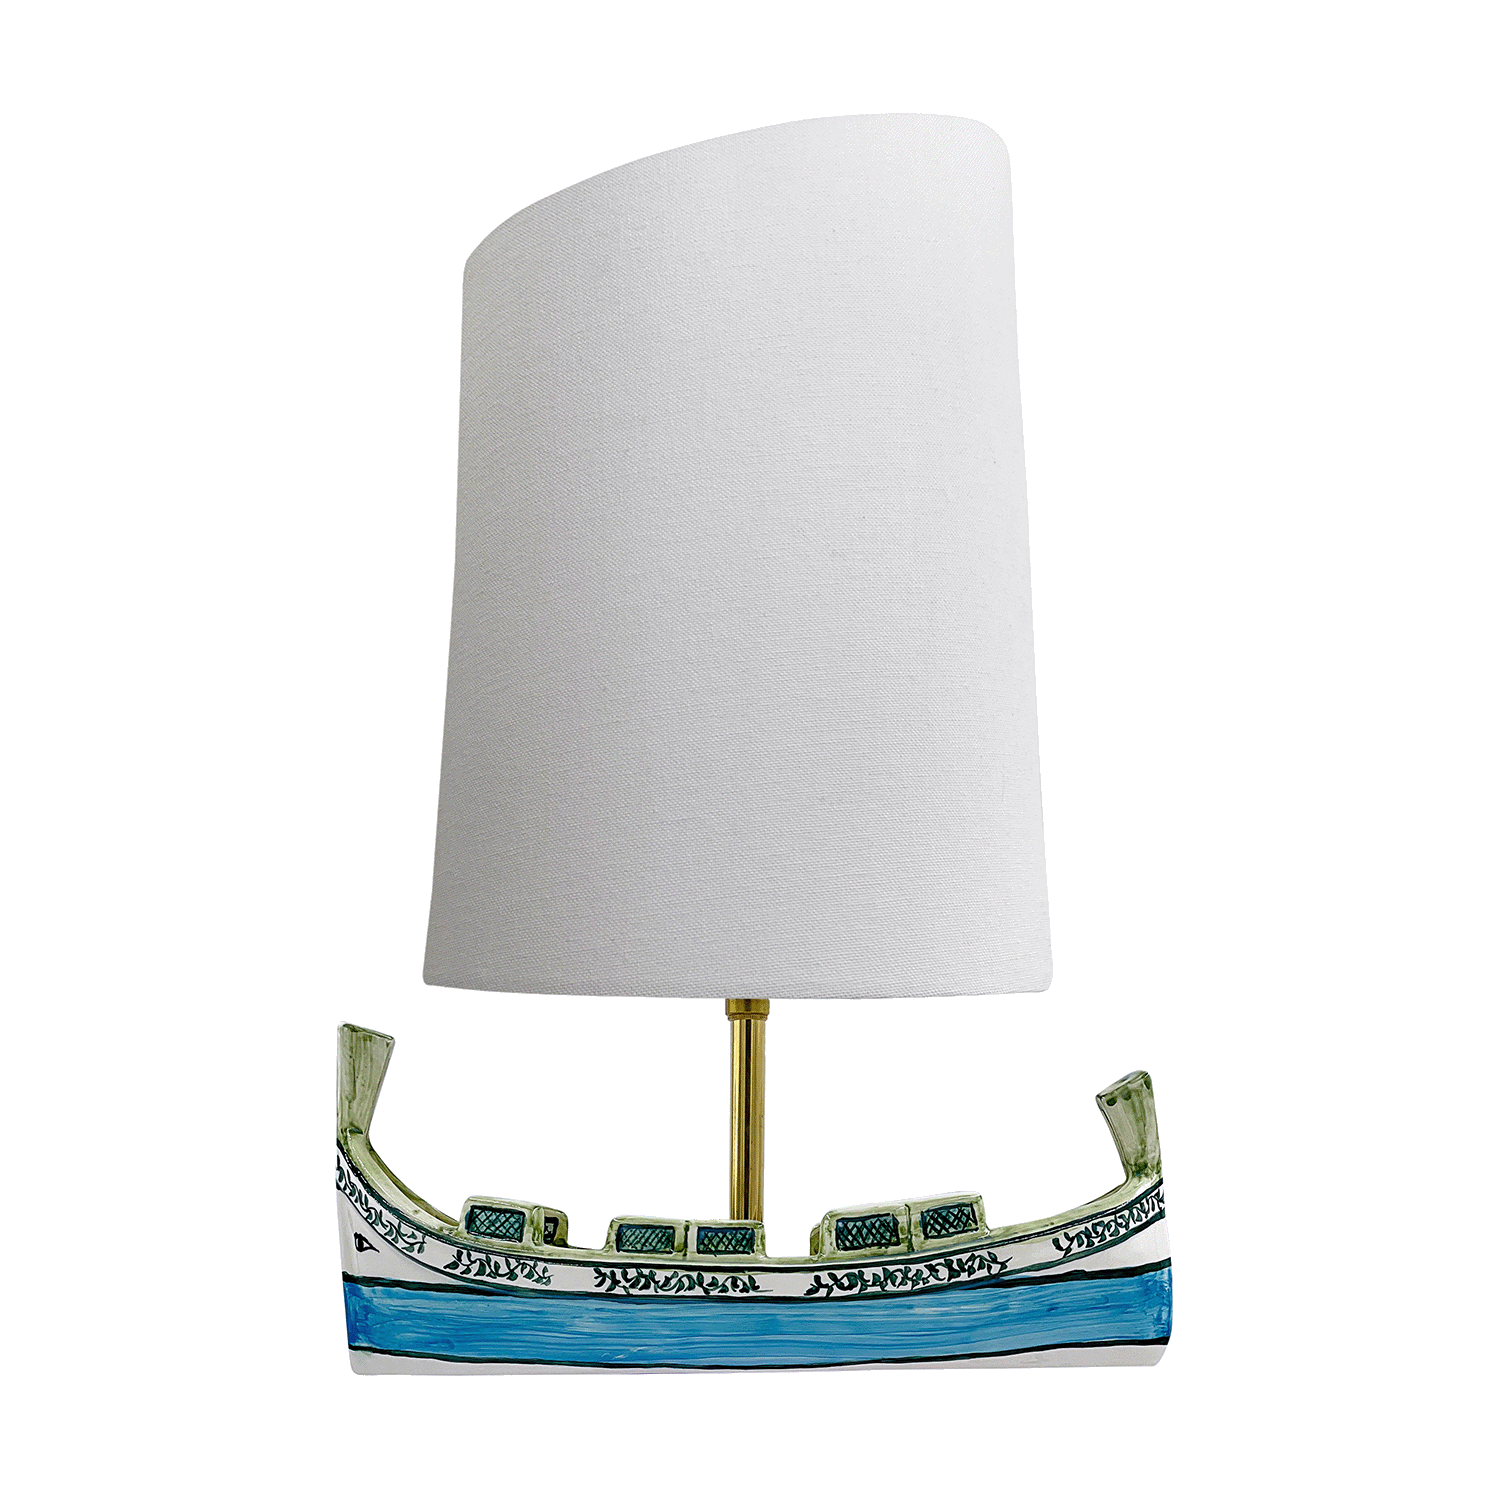 Luzzu Boat Lamp with Sail Lampshade